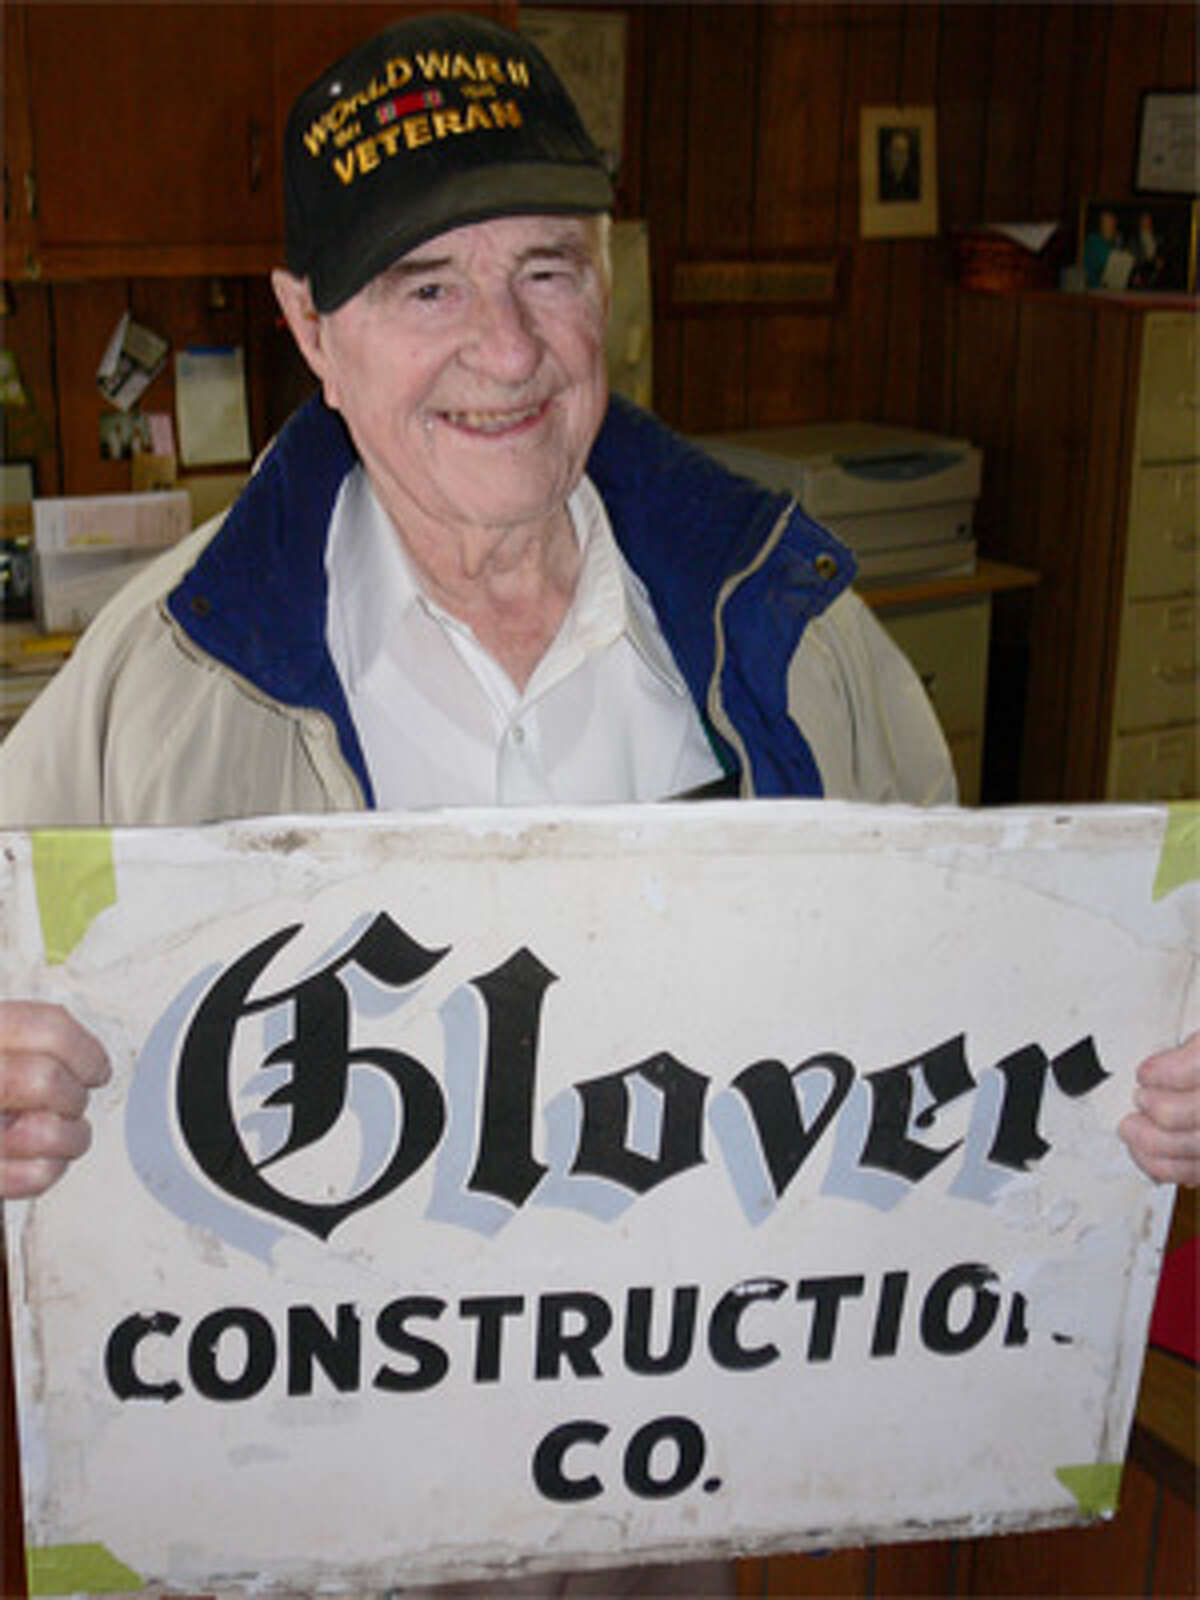 Leroy Glover, 92, holds a sign from the family construction company he ran in Shelton for many decades.